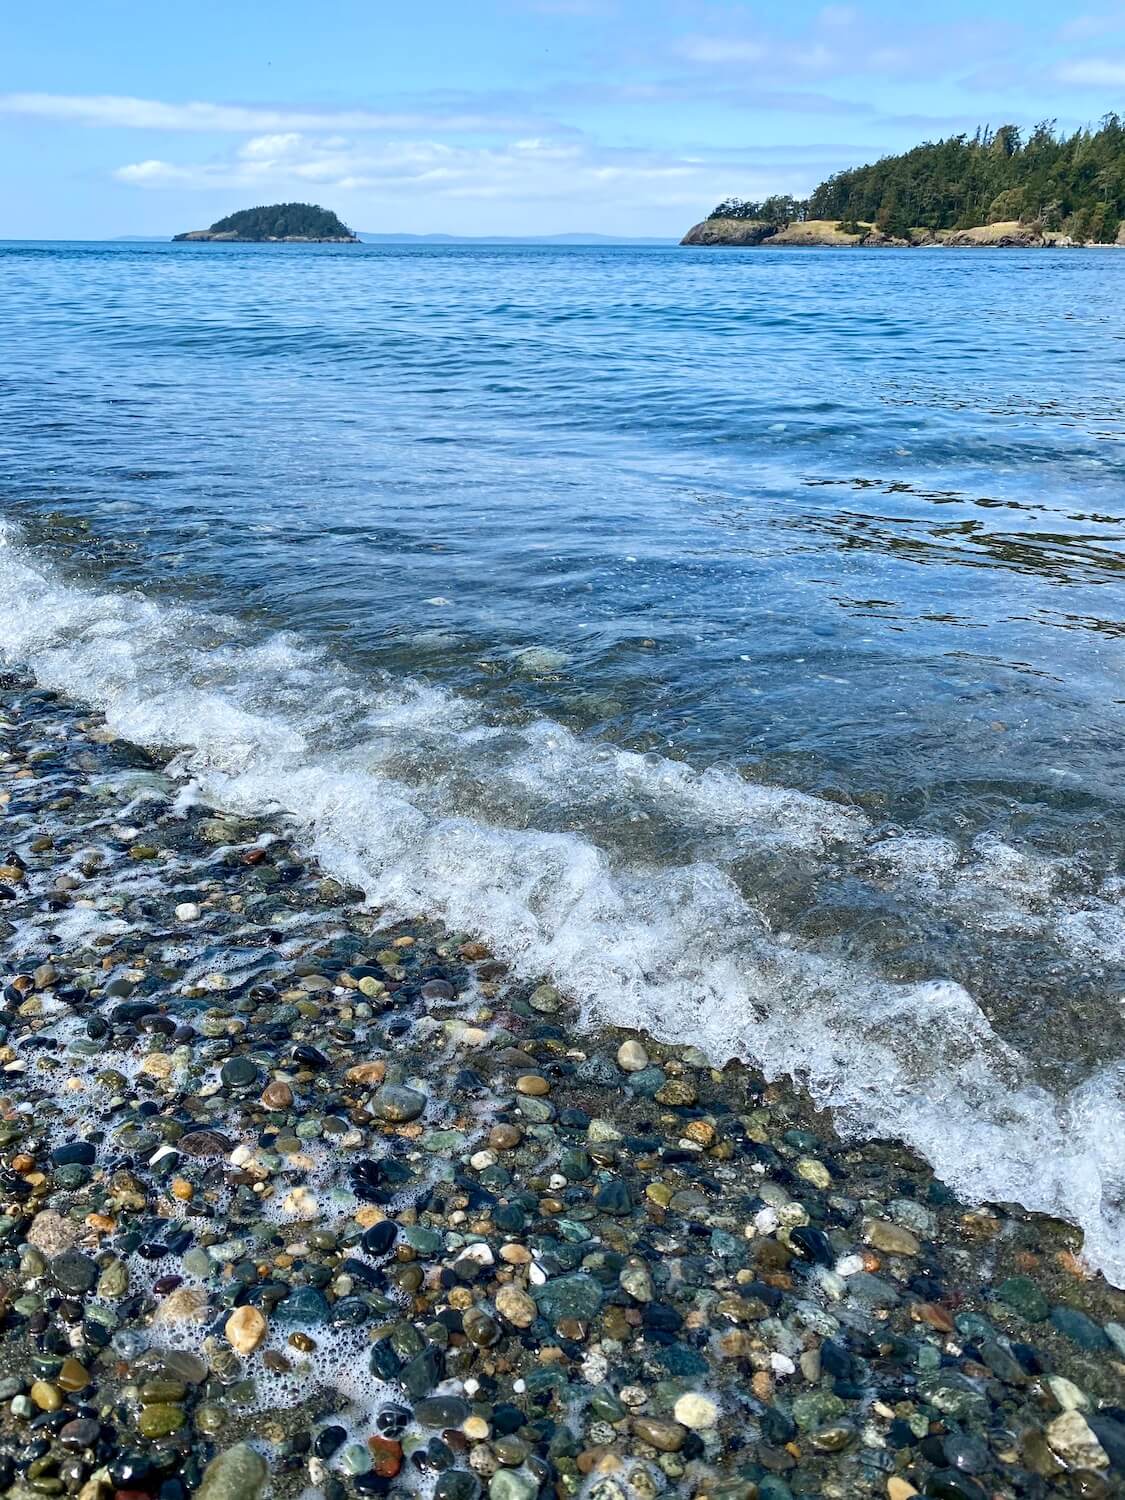 Pacific Northwest travel is all about the water. Here, foamy waves wash up on a pebble beach of the Salish Sea, while islands pop up on the horizon.